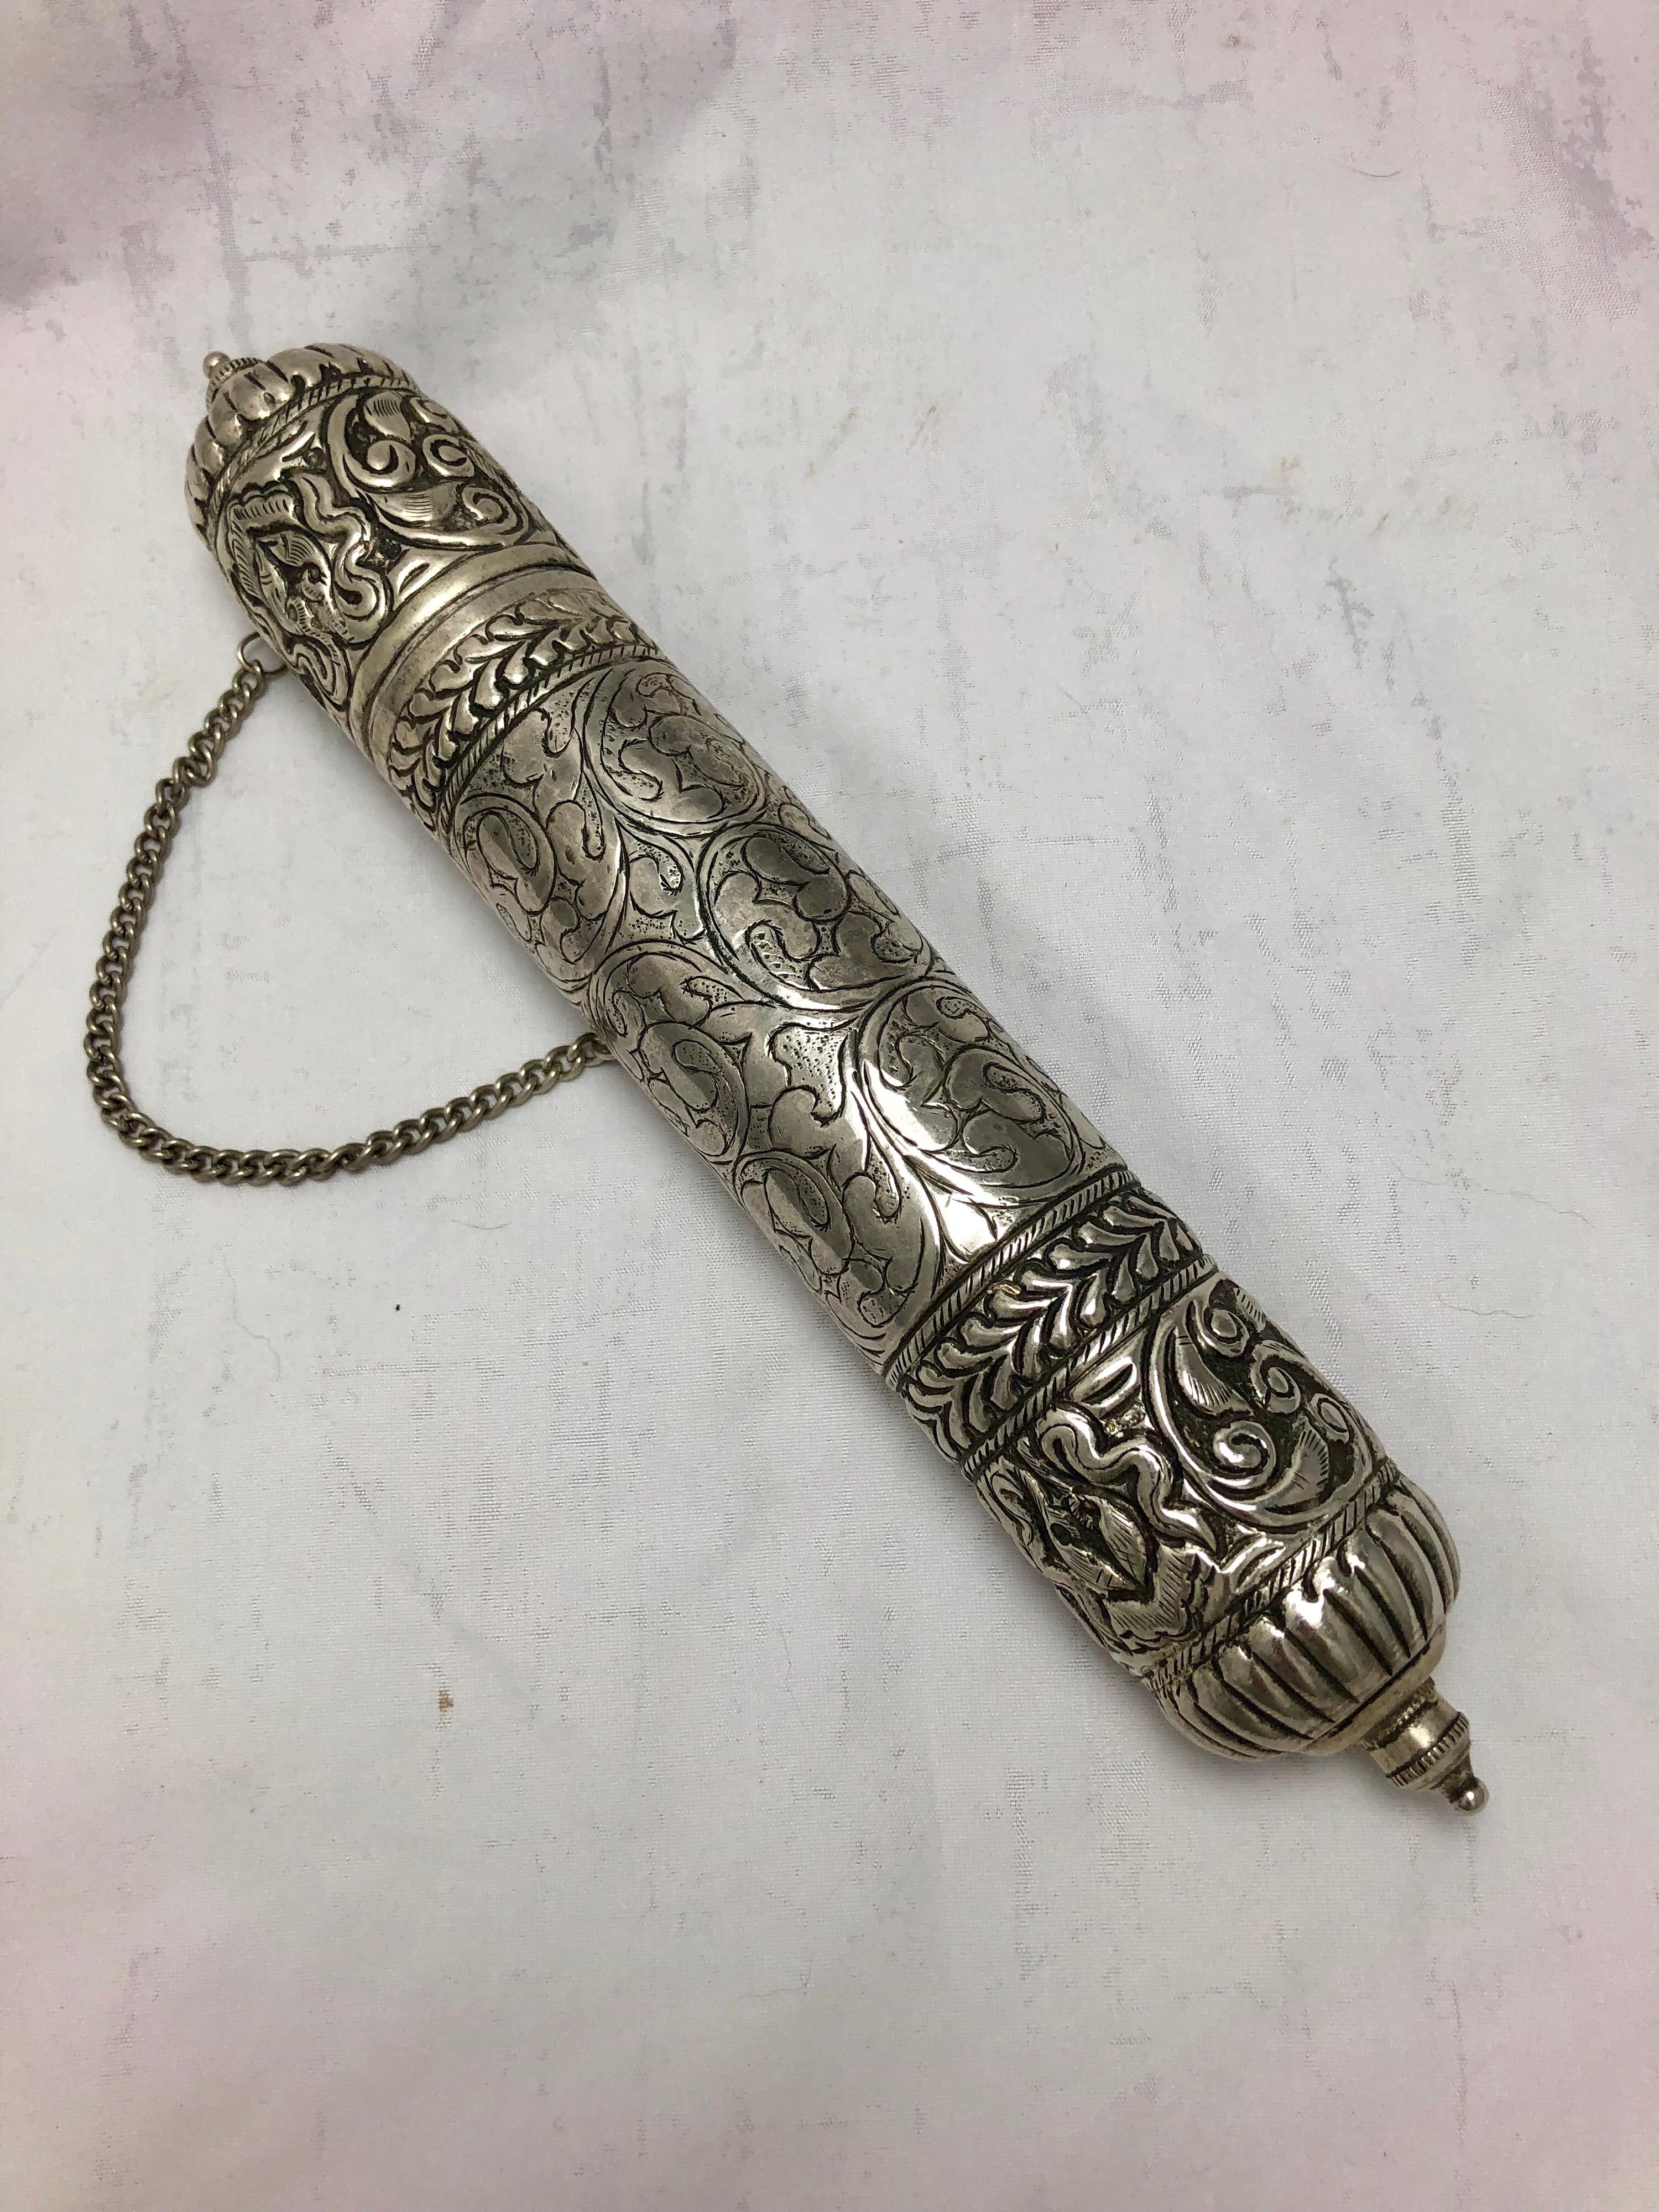 A beautiful, early to mid-19th century silver scroll holder in very good condition. 

The scroll is profusely decorated with engraved and repousse designs, with foliage and flowers. It opens at one end and would contain a religious prayer, message